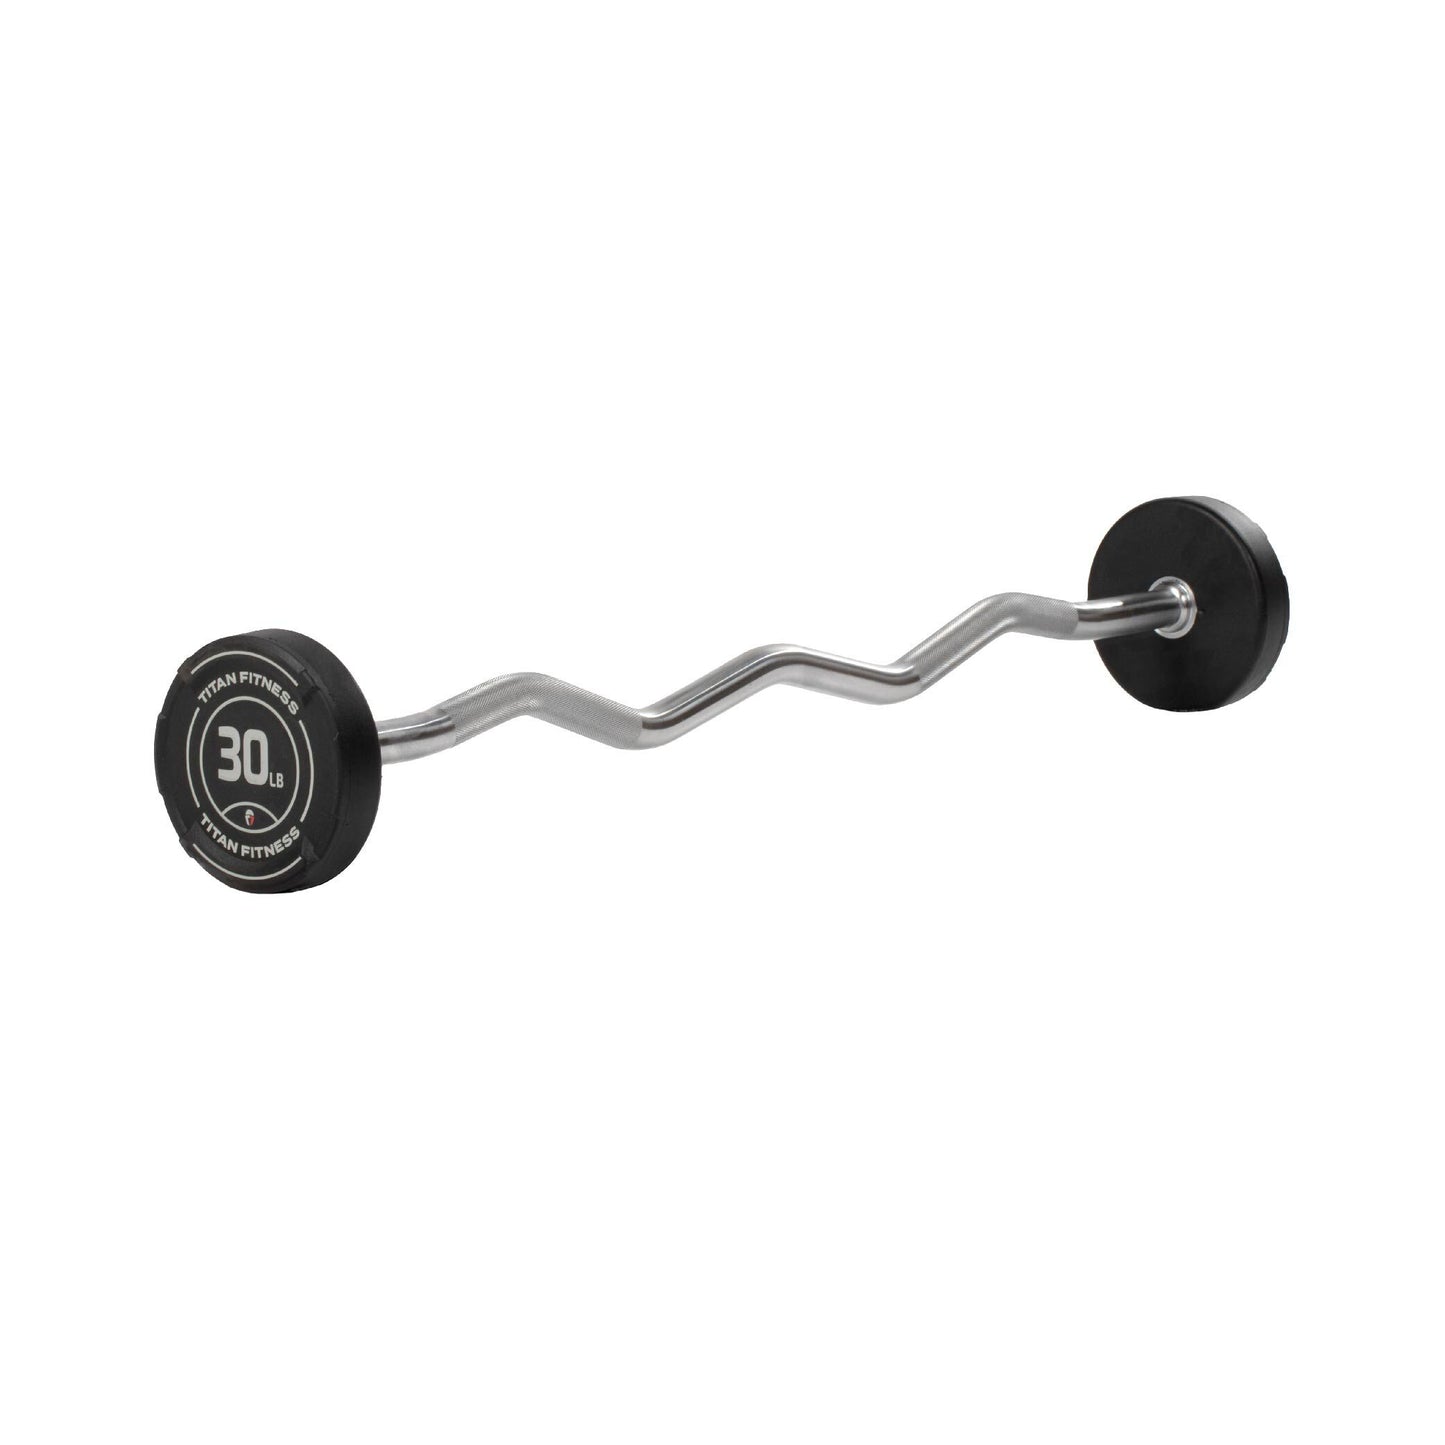 30 LB EZ Curl Fixed Rubber Barbell - view 1